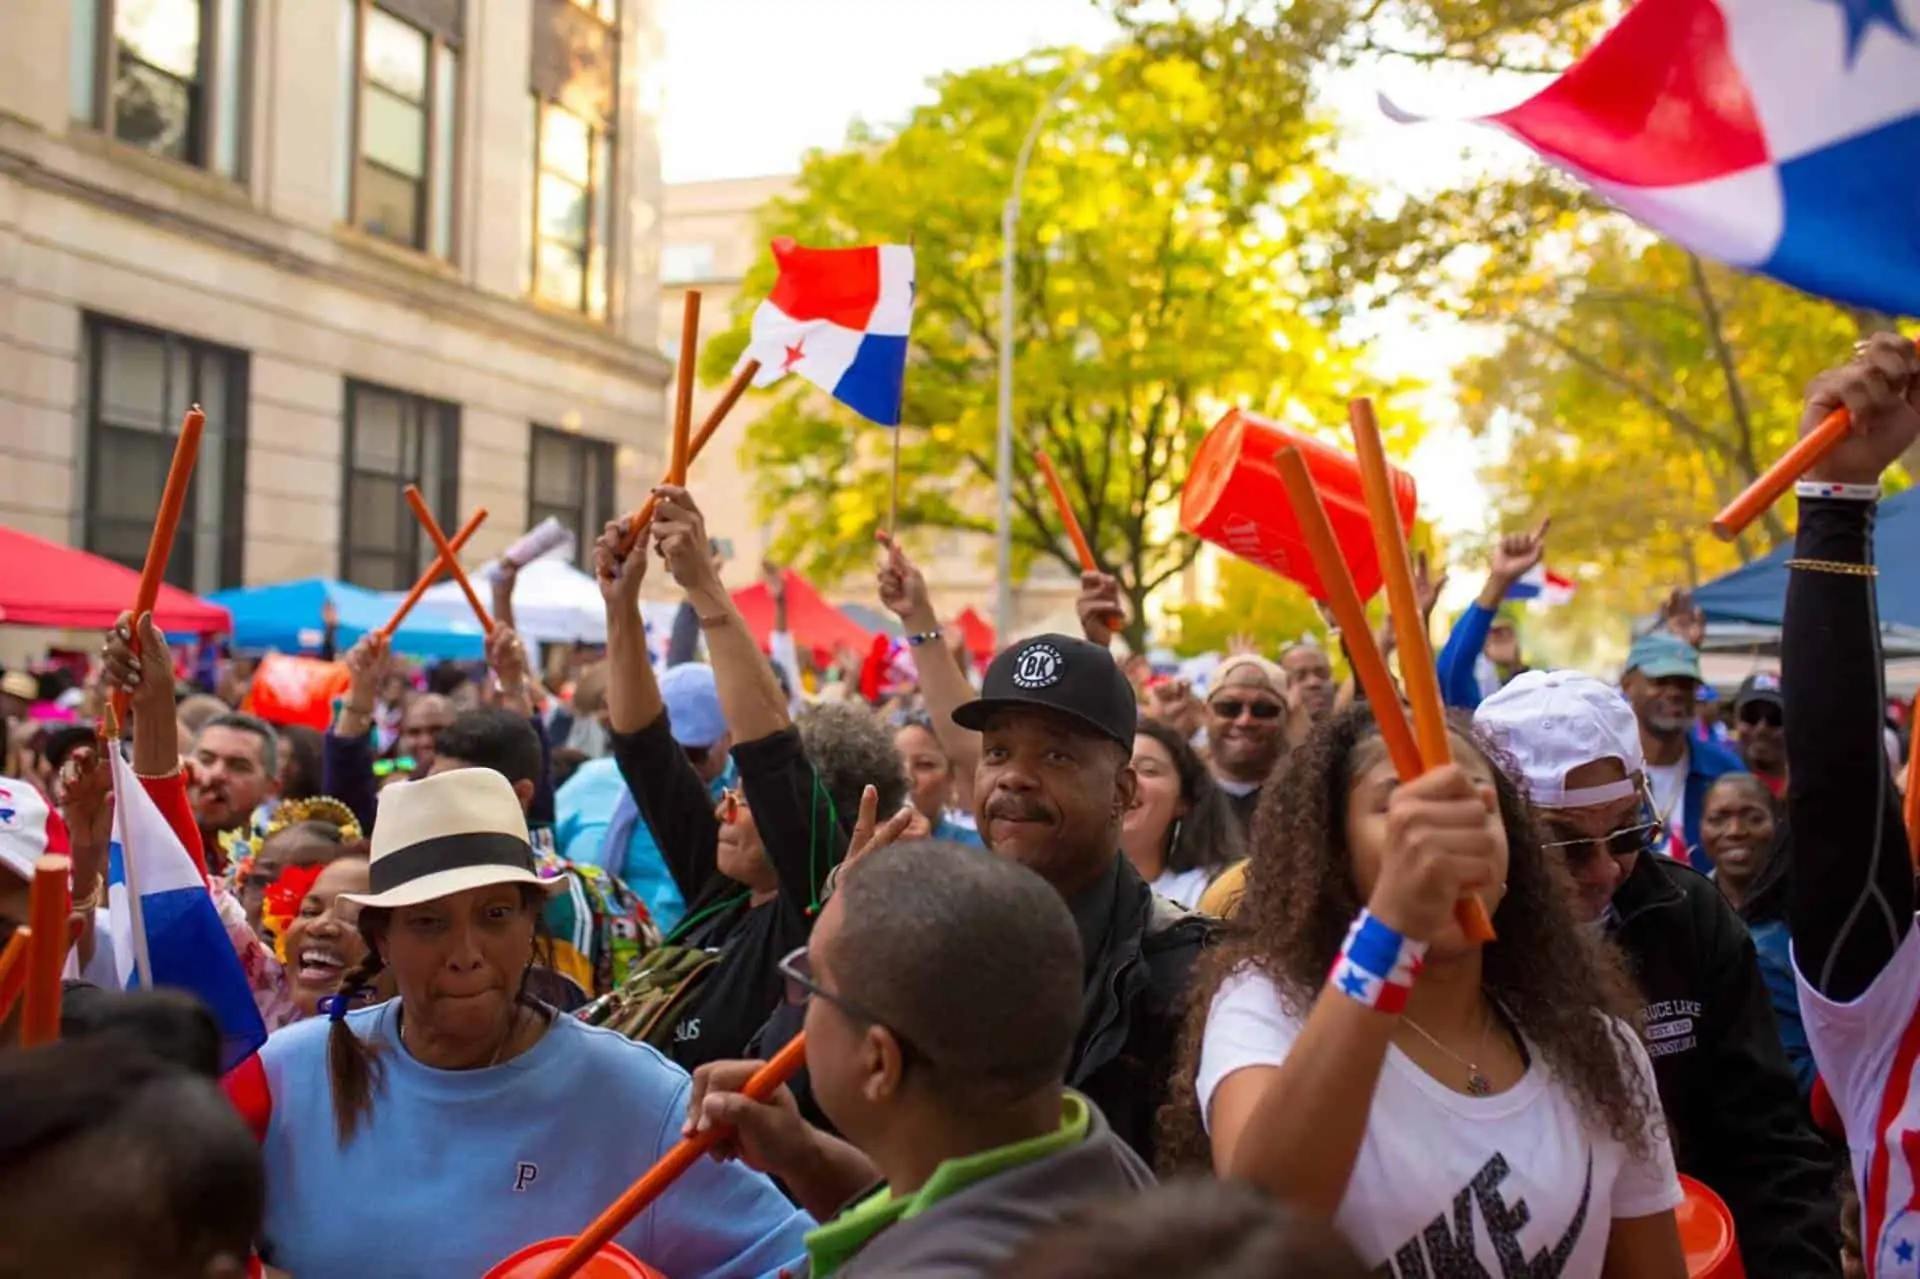 About 6M Americans identify themselves as Afro Latino.